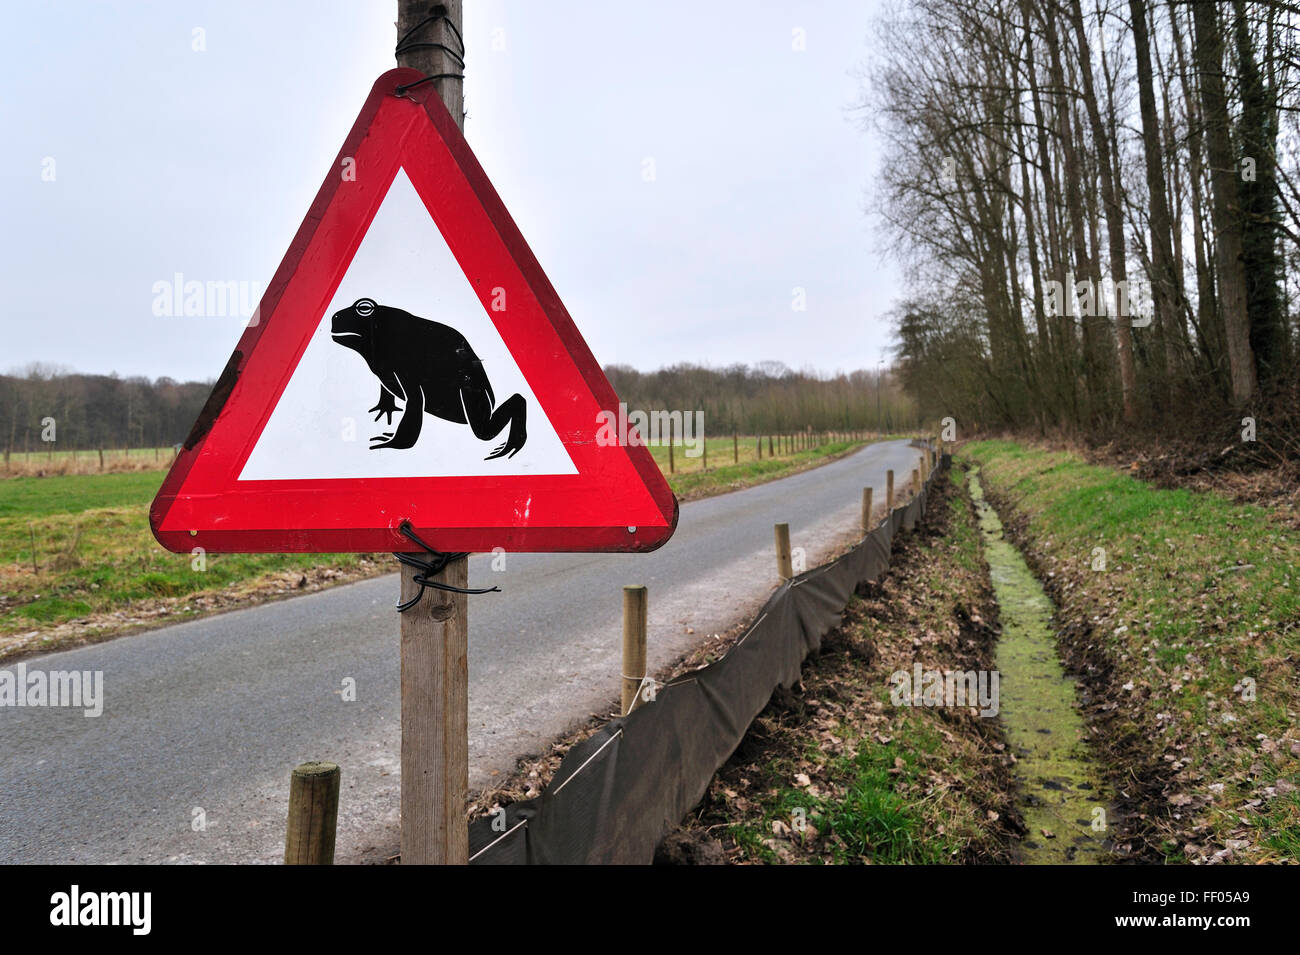 Warning sign and barrier with buckets for migrating amphibians / toads crossing the road during annual migration in spring Stock Photo